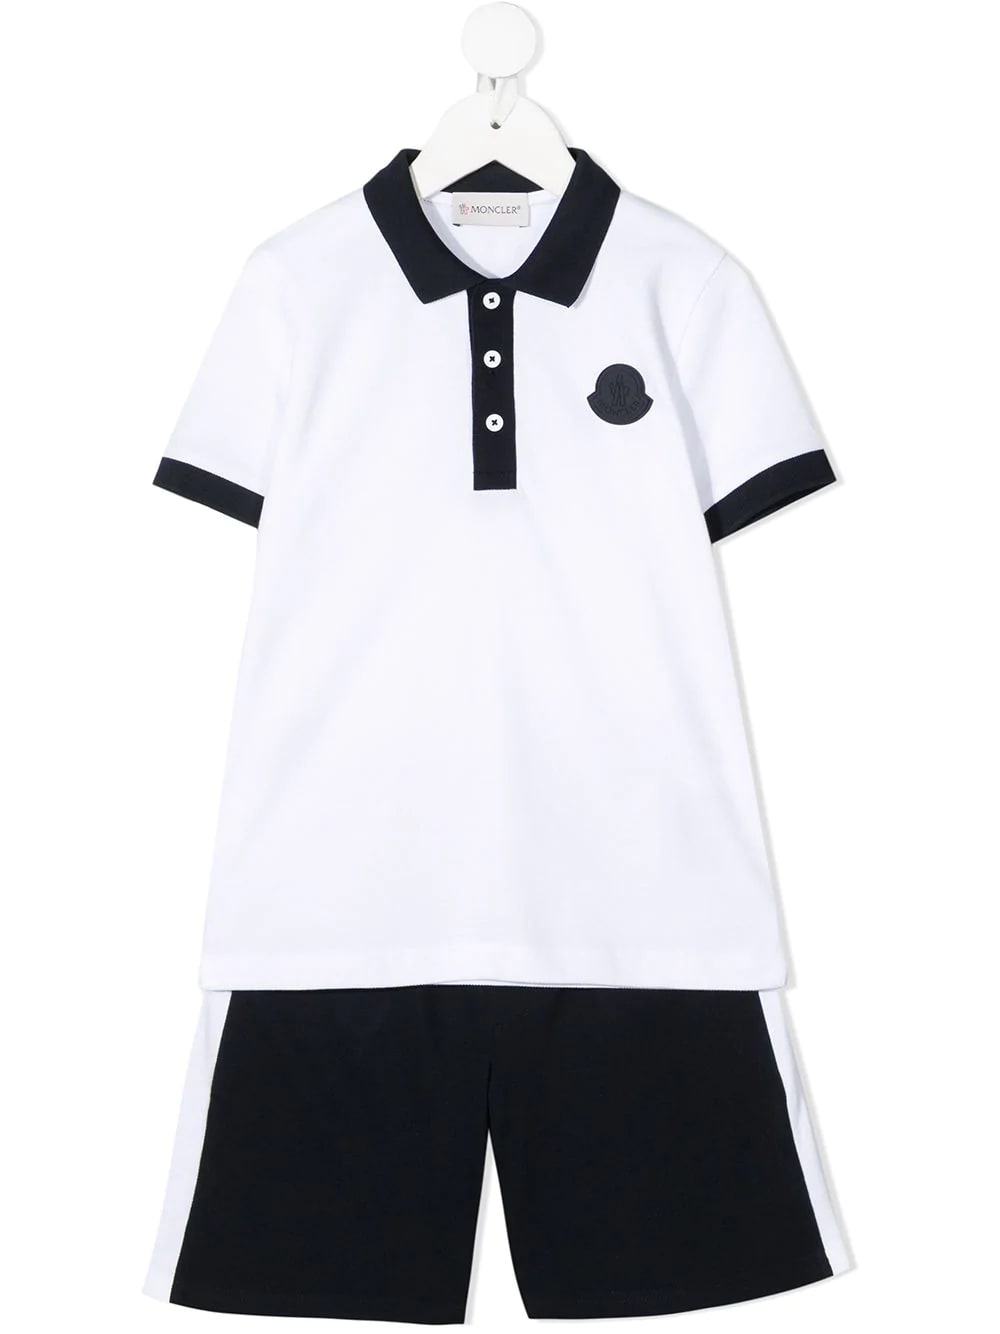 MONCLER WHITE AND DARK BLUE POLO AND SHORTS KID SET,8M746-20 8496W 003